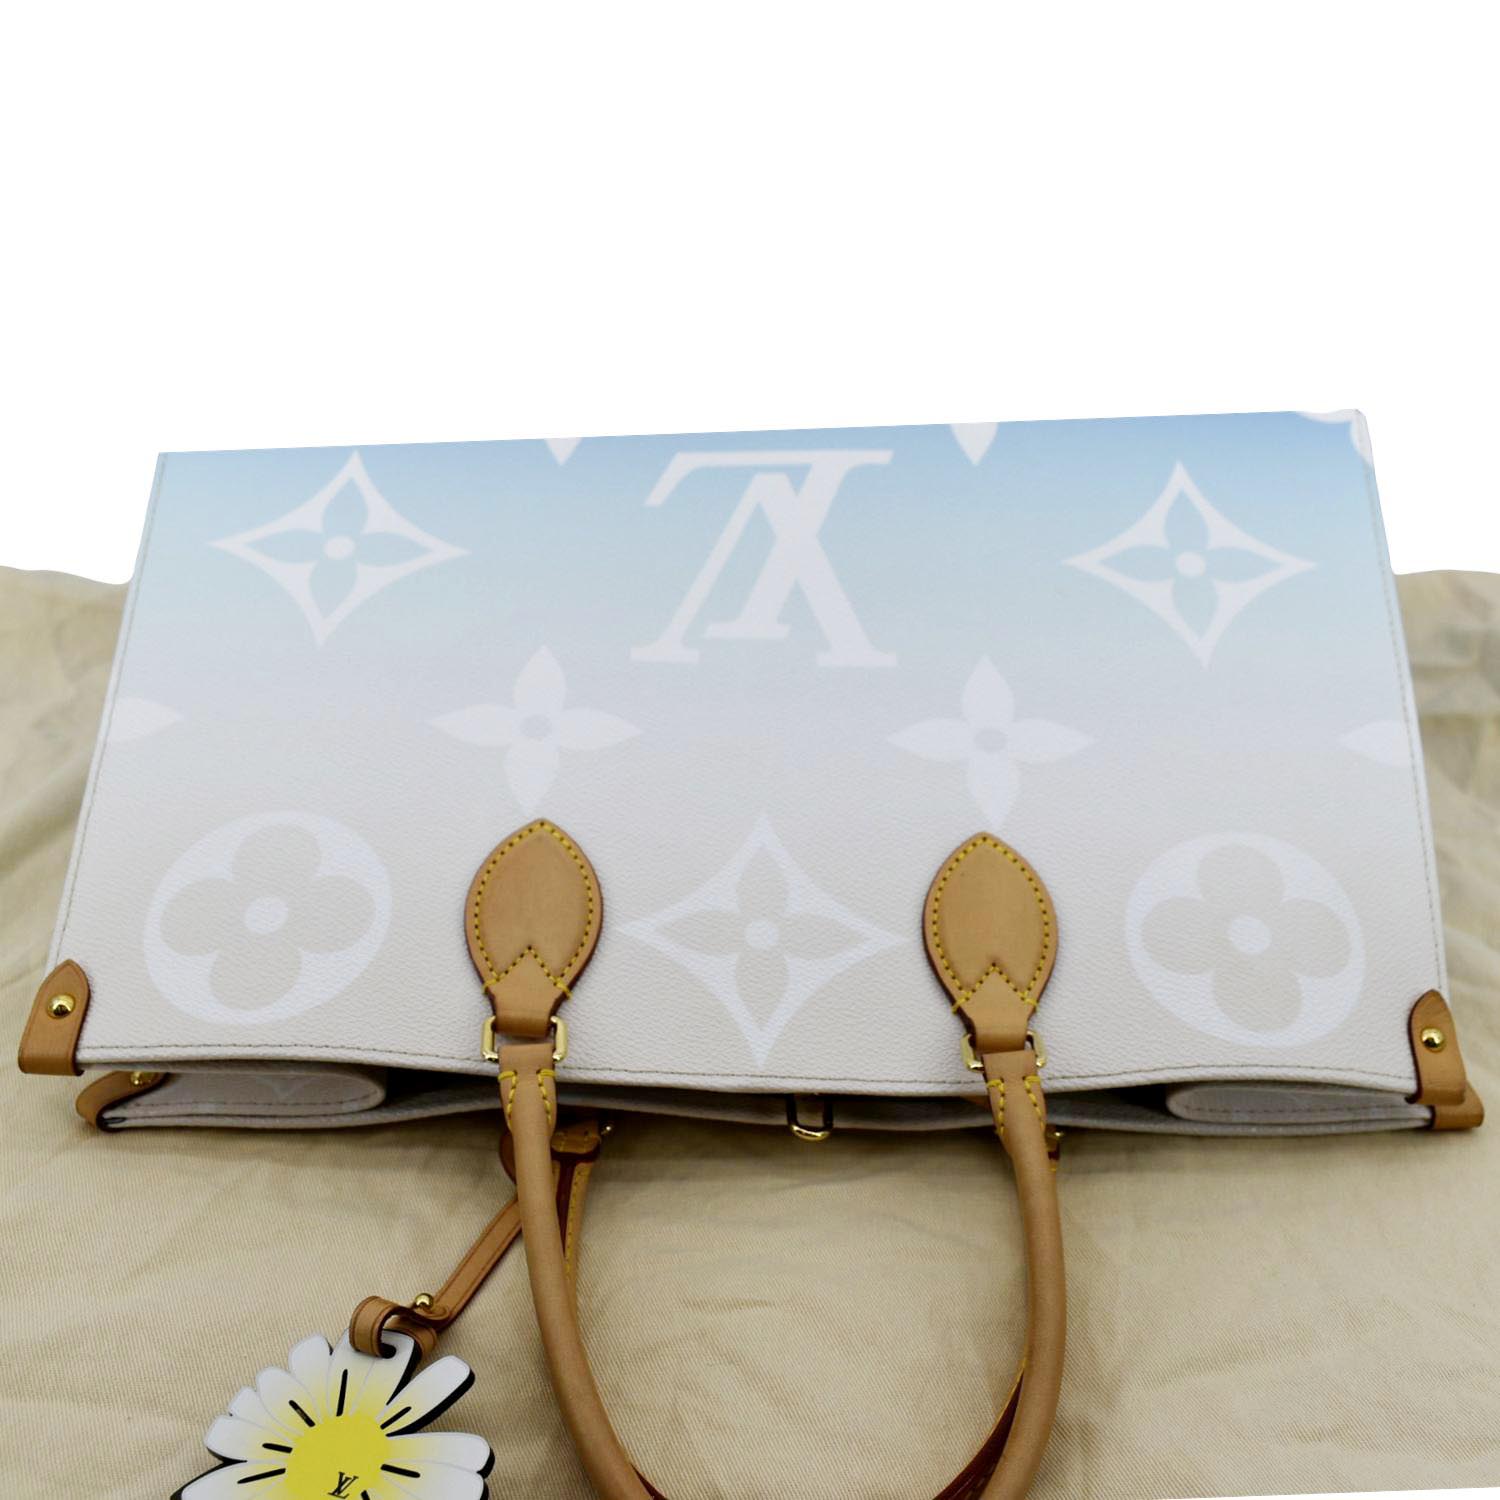 Louis Vuitton Limited Edition Mist Monogram Giant Canvas by The Pool Onthego GM Tote Bag